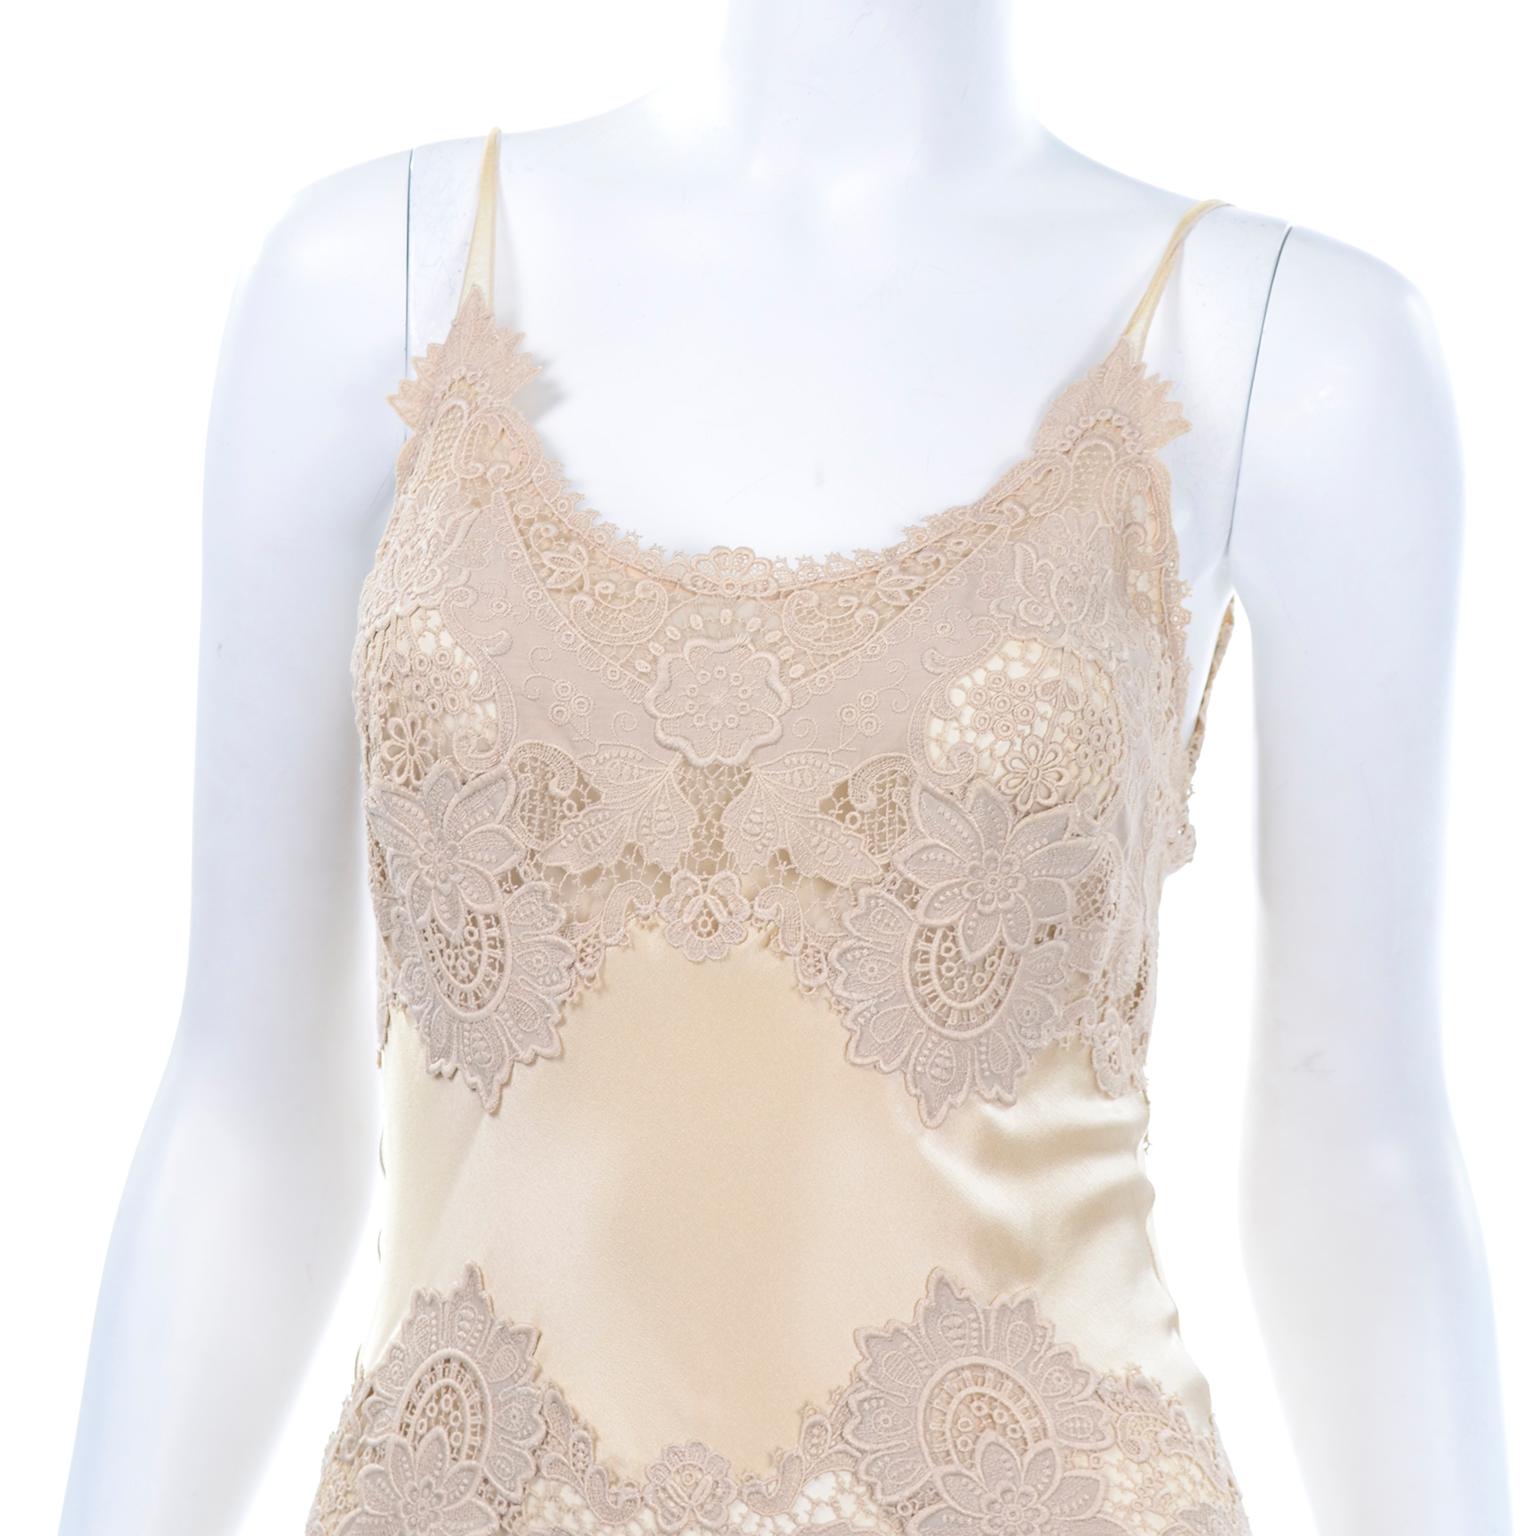 2005 Alexander McQueen Champagne Silk & Lace Slip Dress With Sleeveless Wrap Top 5